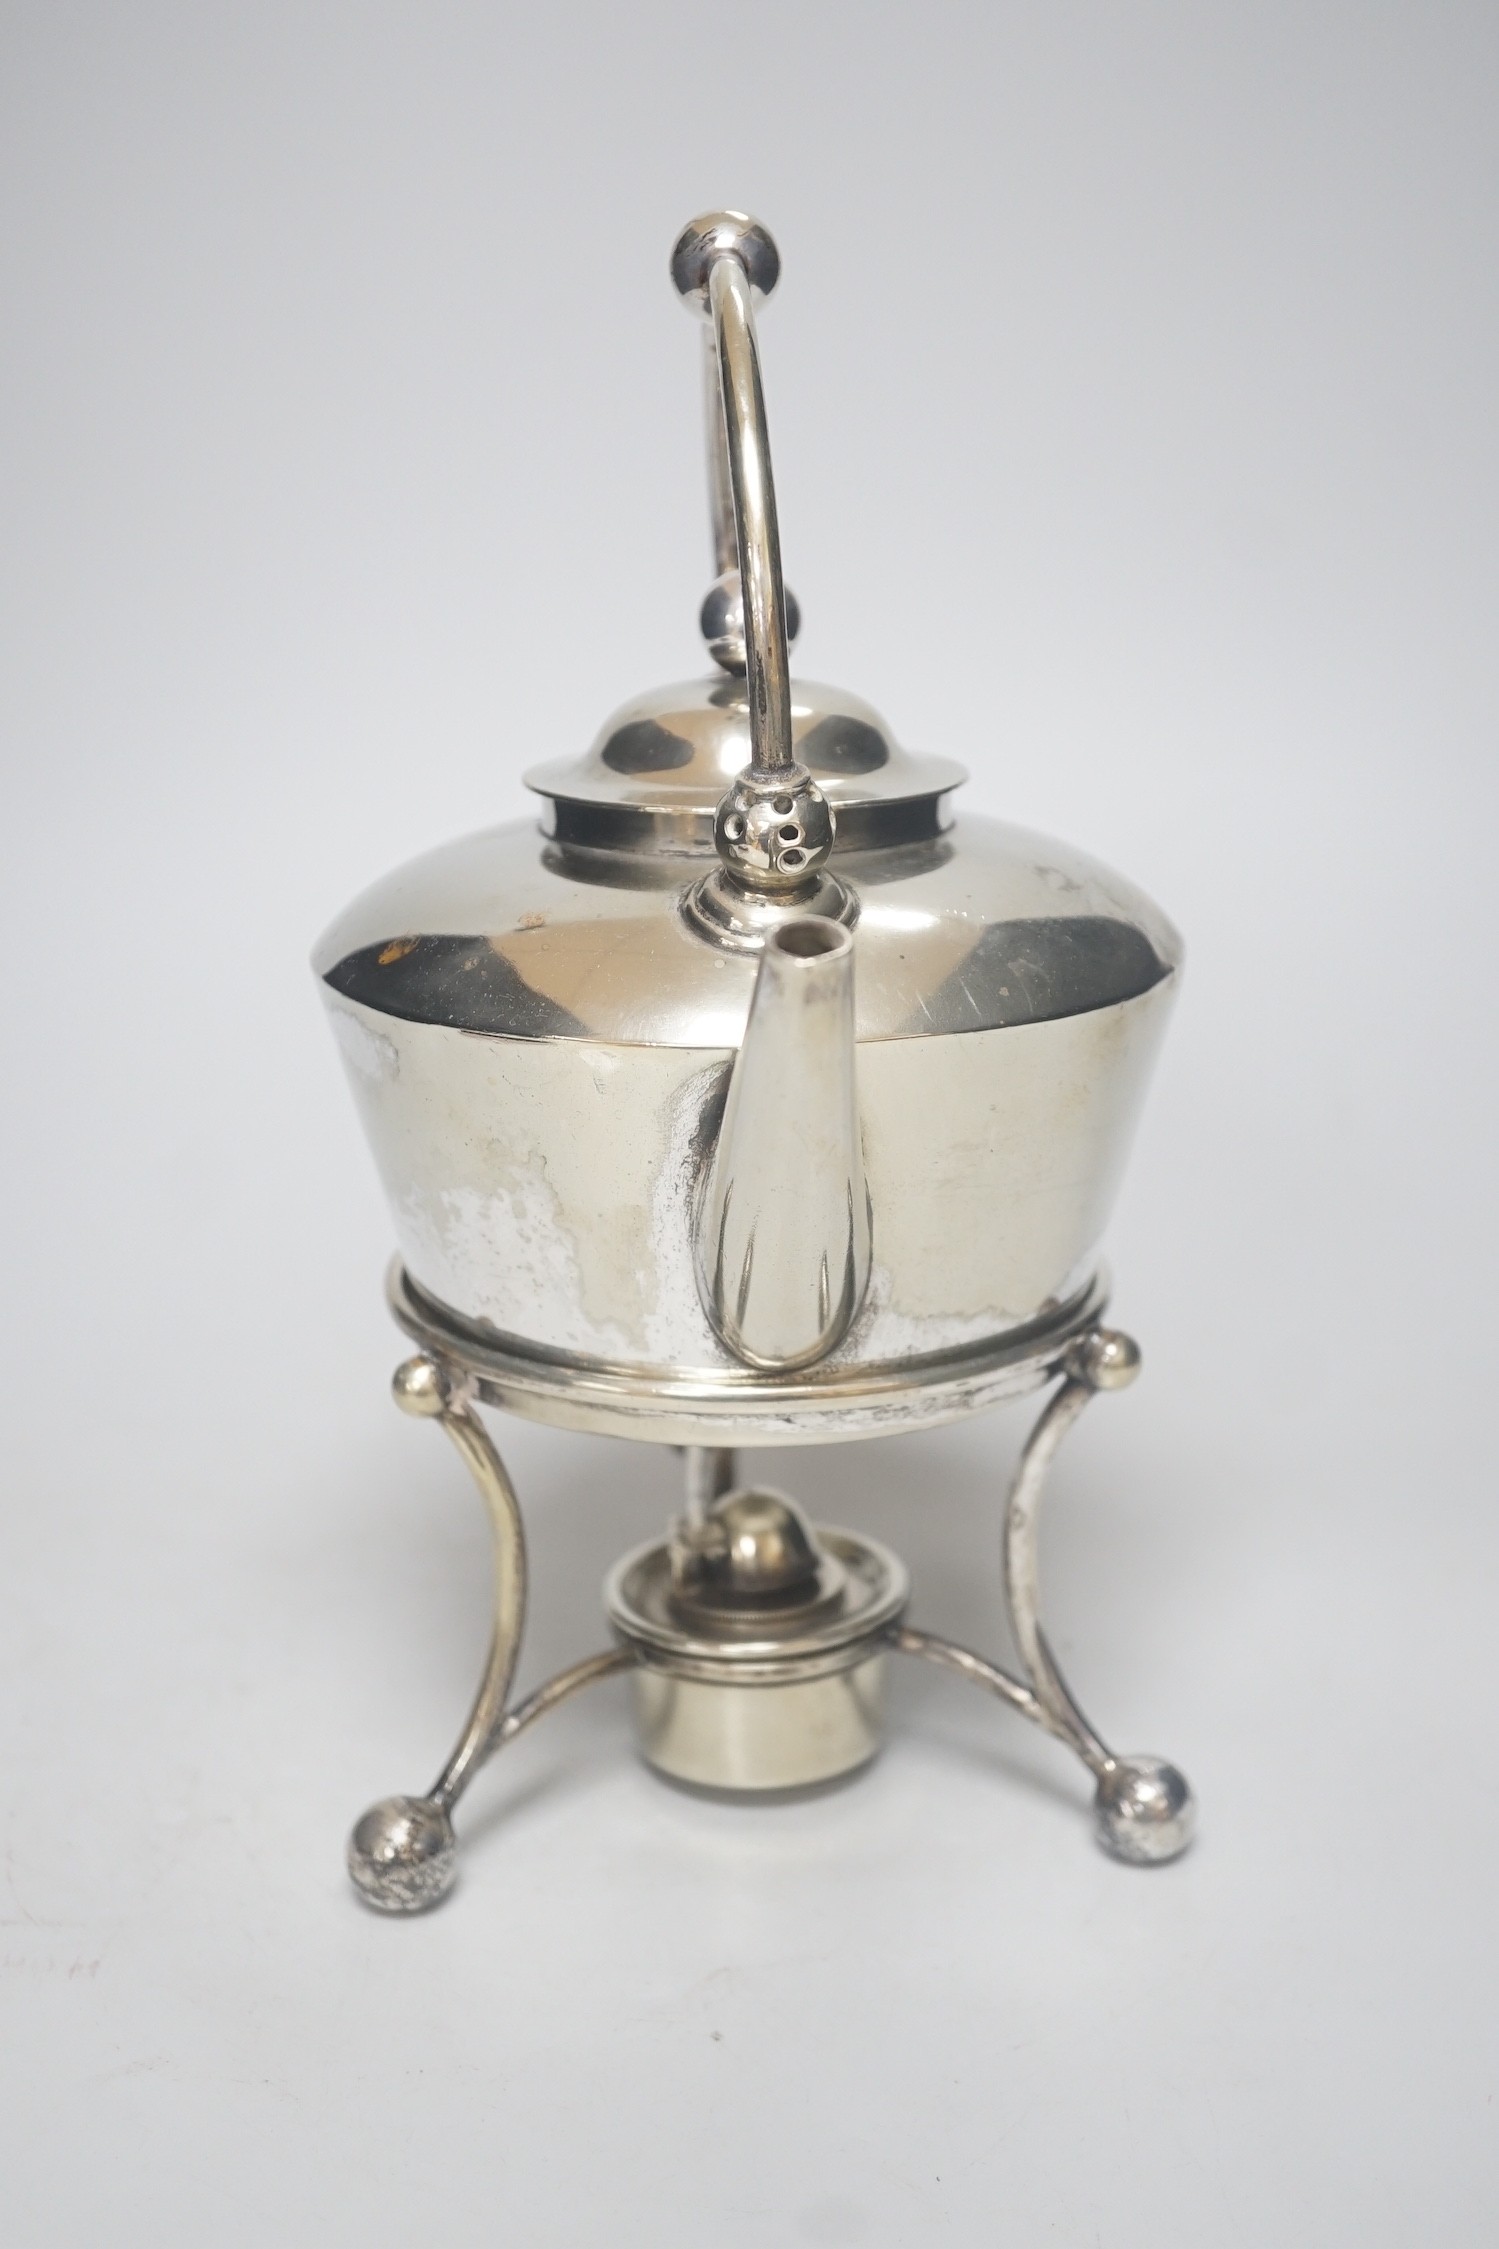 A Dresser style electroplate tea kettle, burner and stand - Image 2 of 3